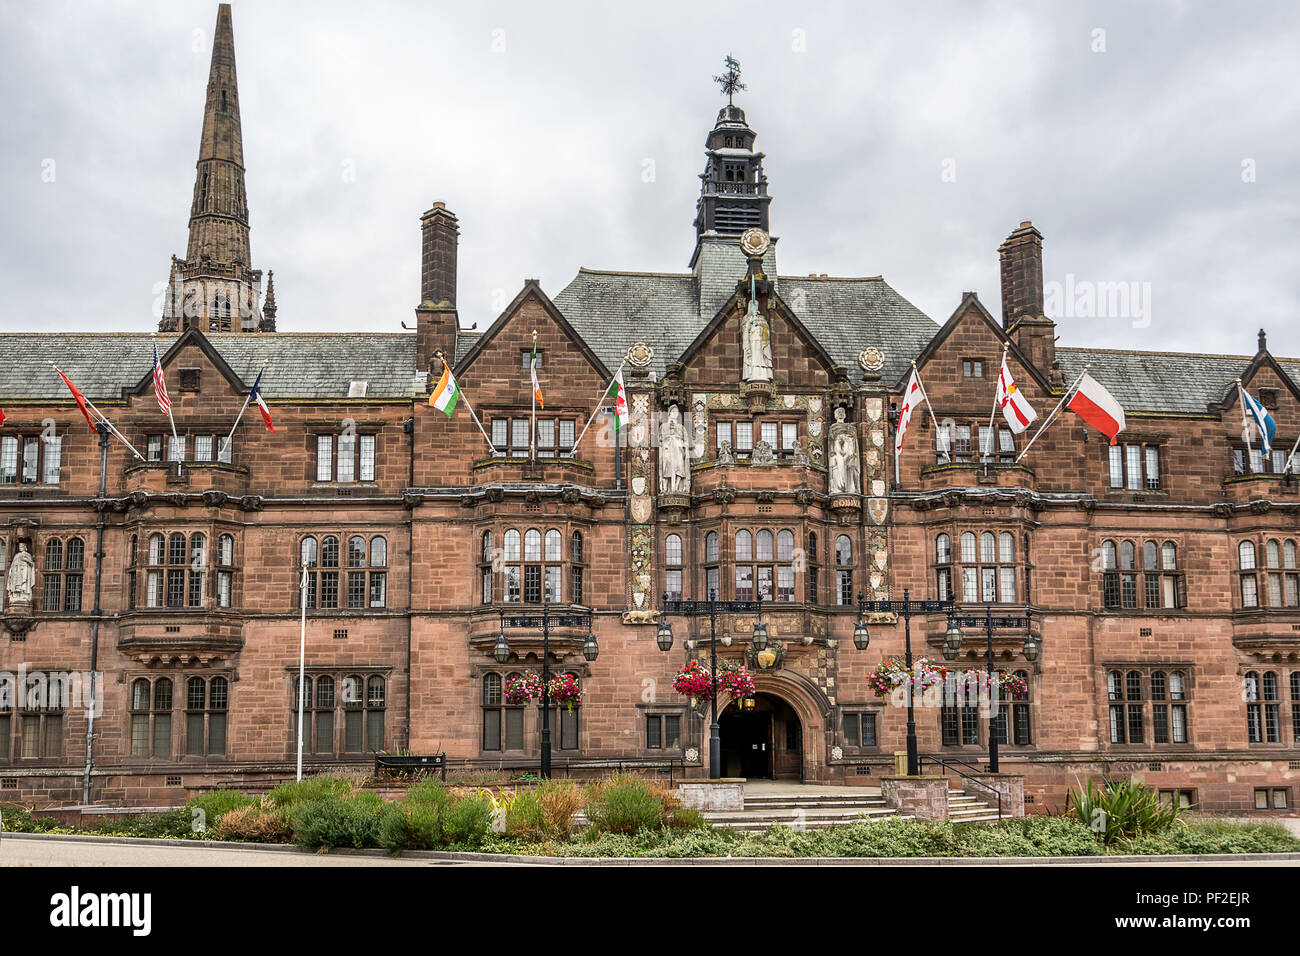 Der Rat Haus in Coventry, England Stockfoto